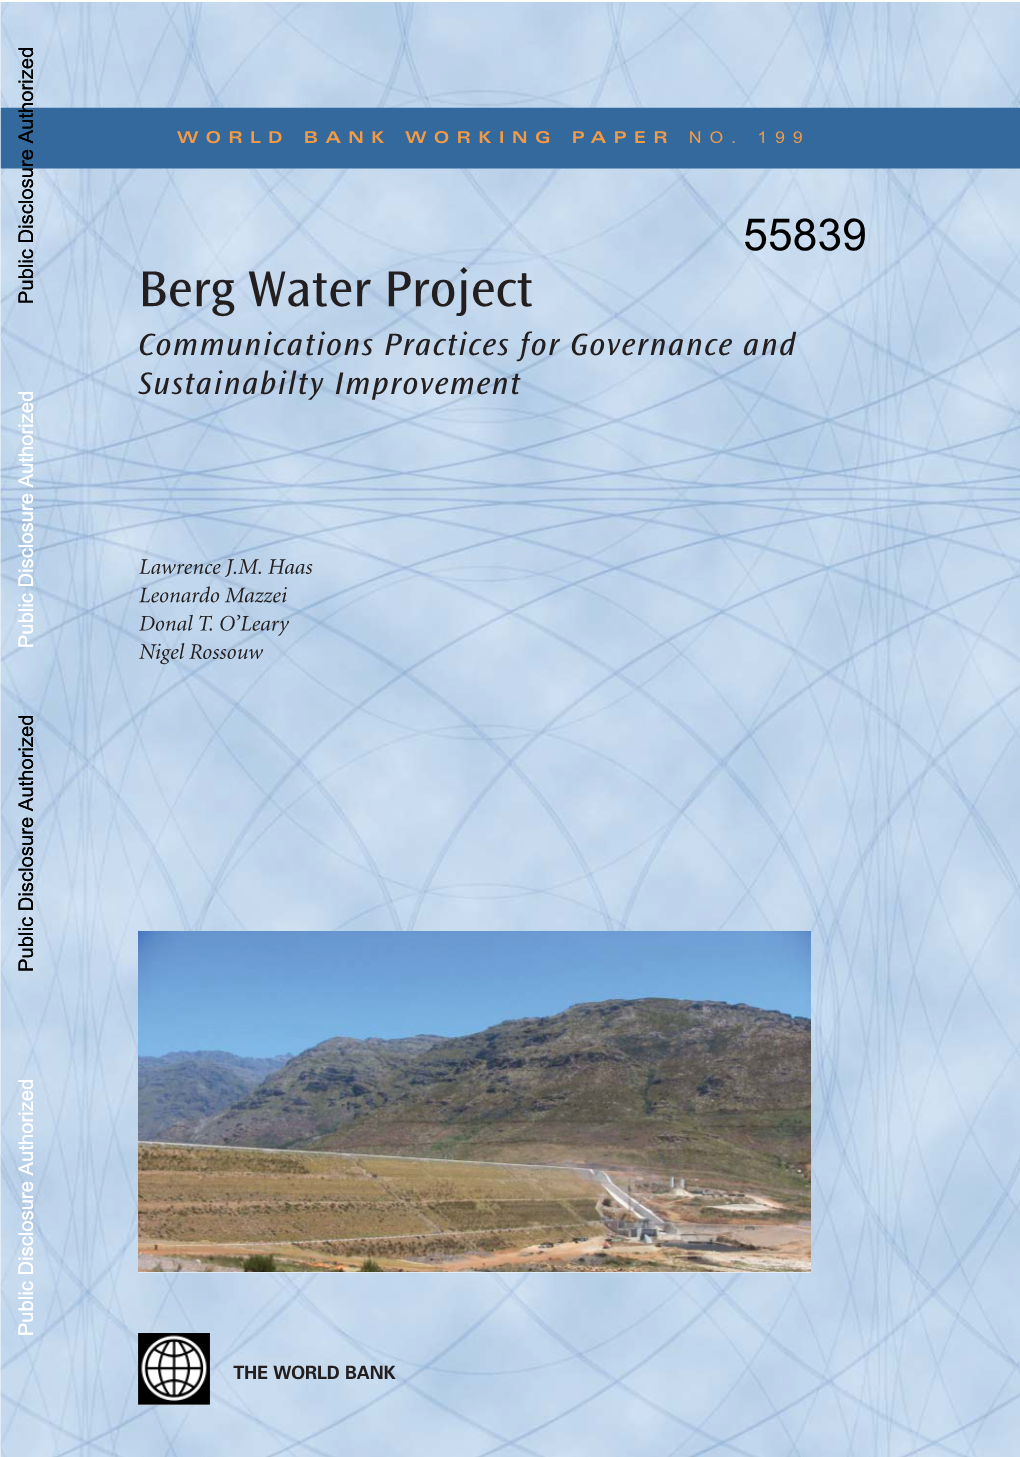 The Berg Water Project